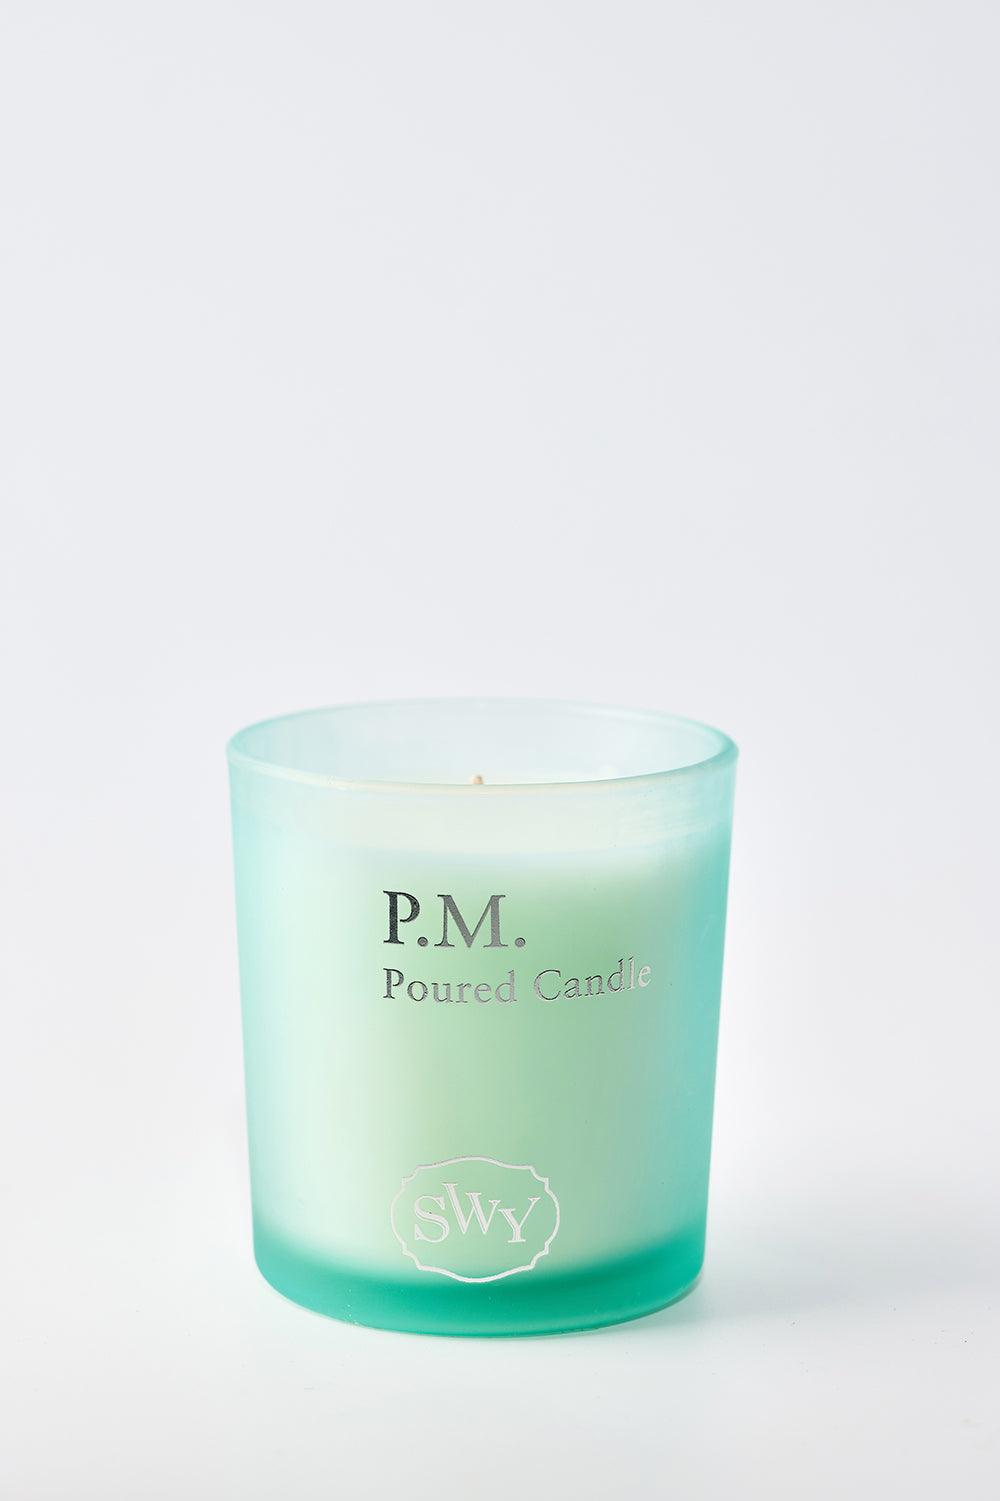 Poured Candle – P.M. - SWY - Scent With You